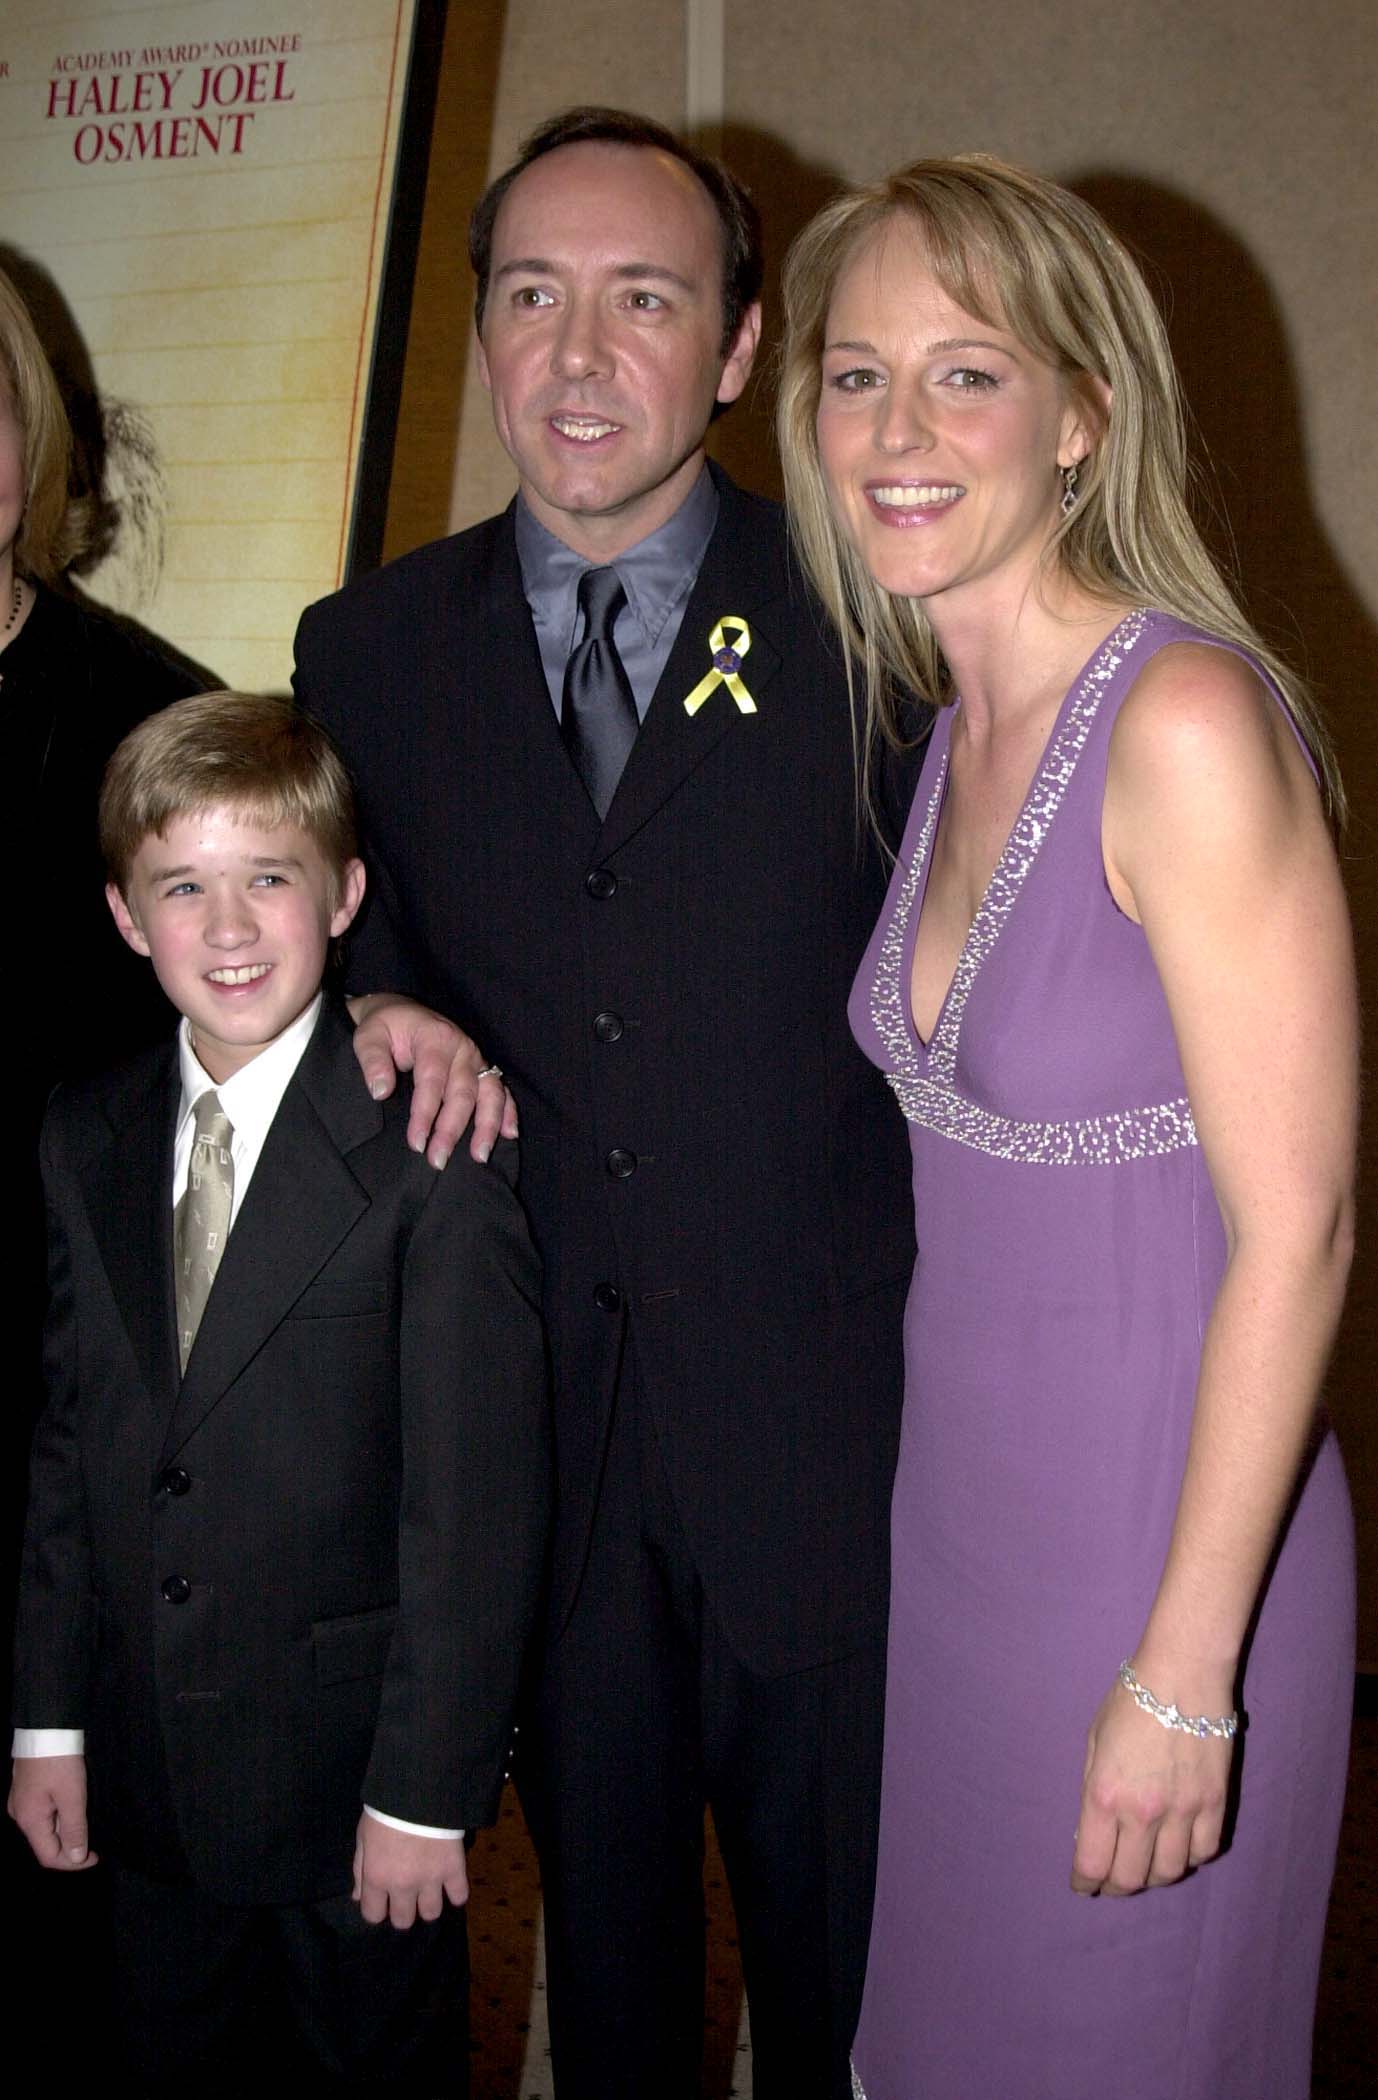 Helen Hunt, Haley Joel Osment, and Kevin Spacey attend the "Pay It Forward" Premiere in 2000 in Los Angeles, California. | Source: Getty Images